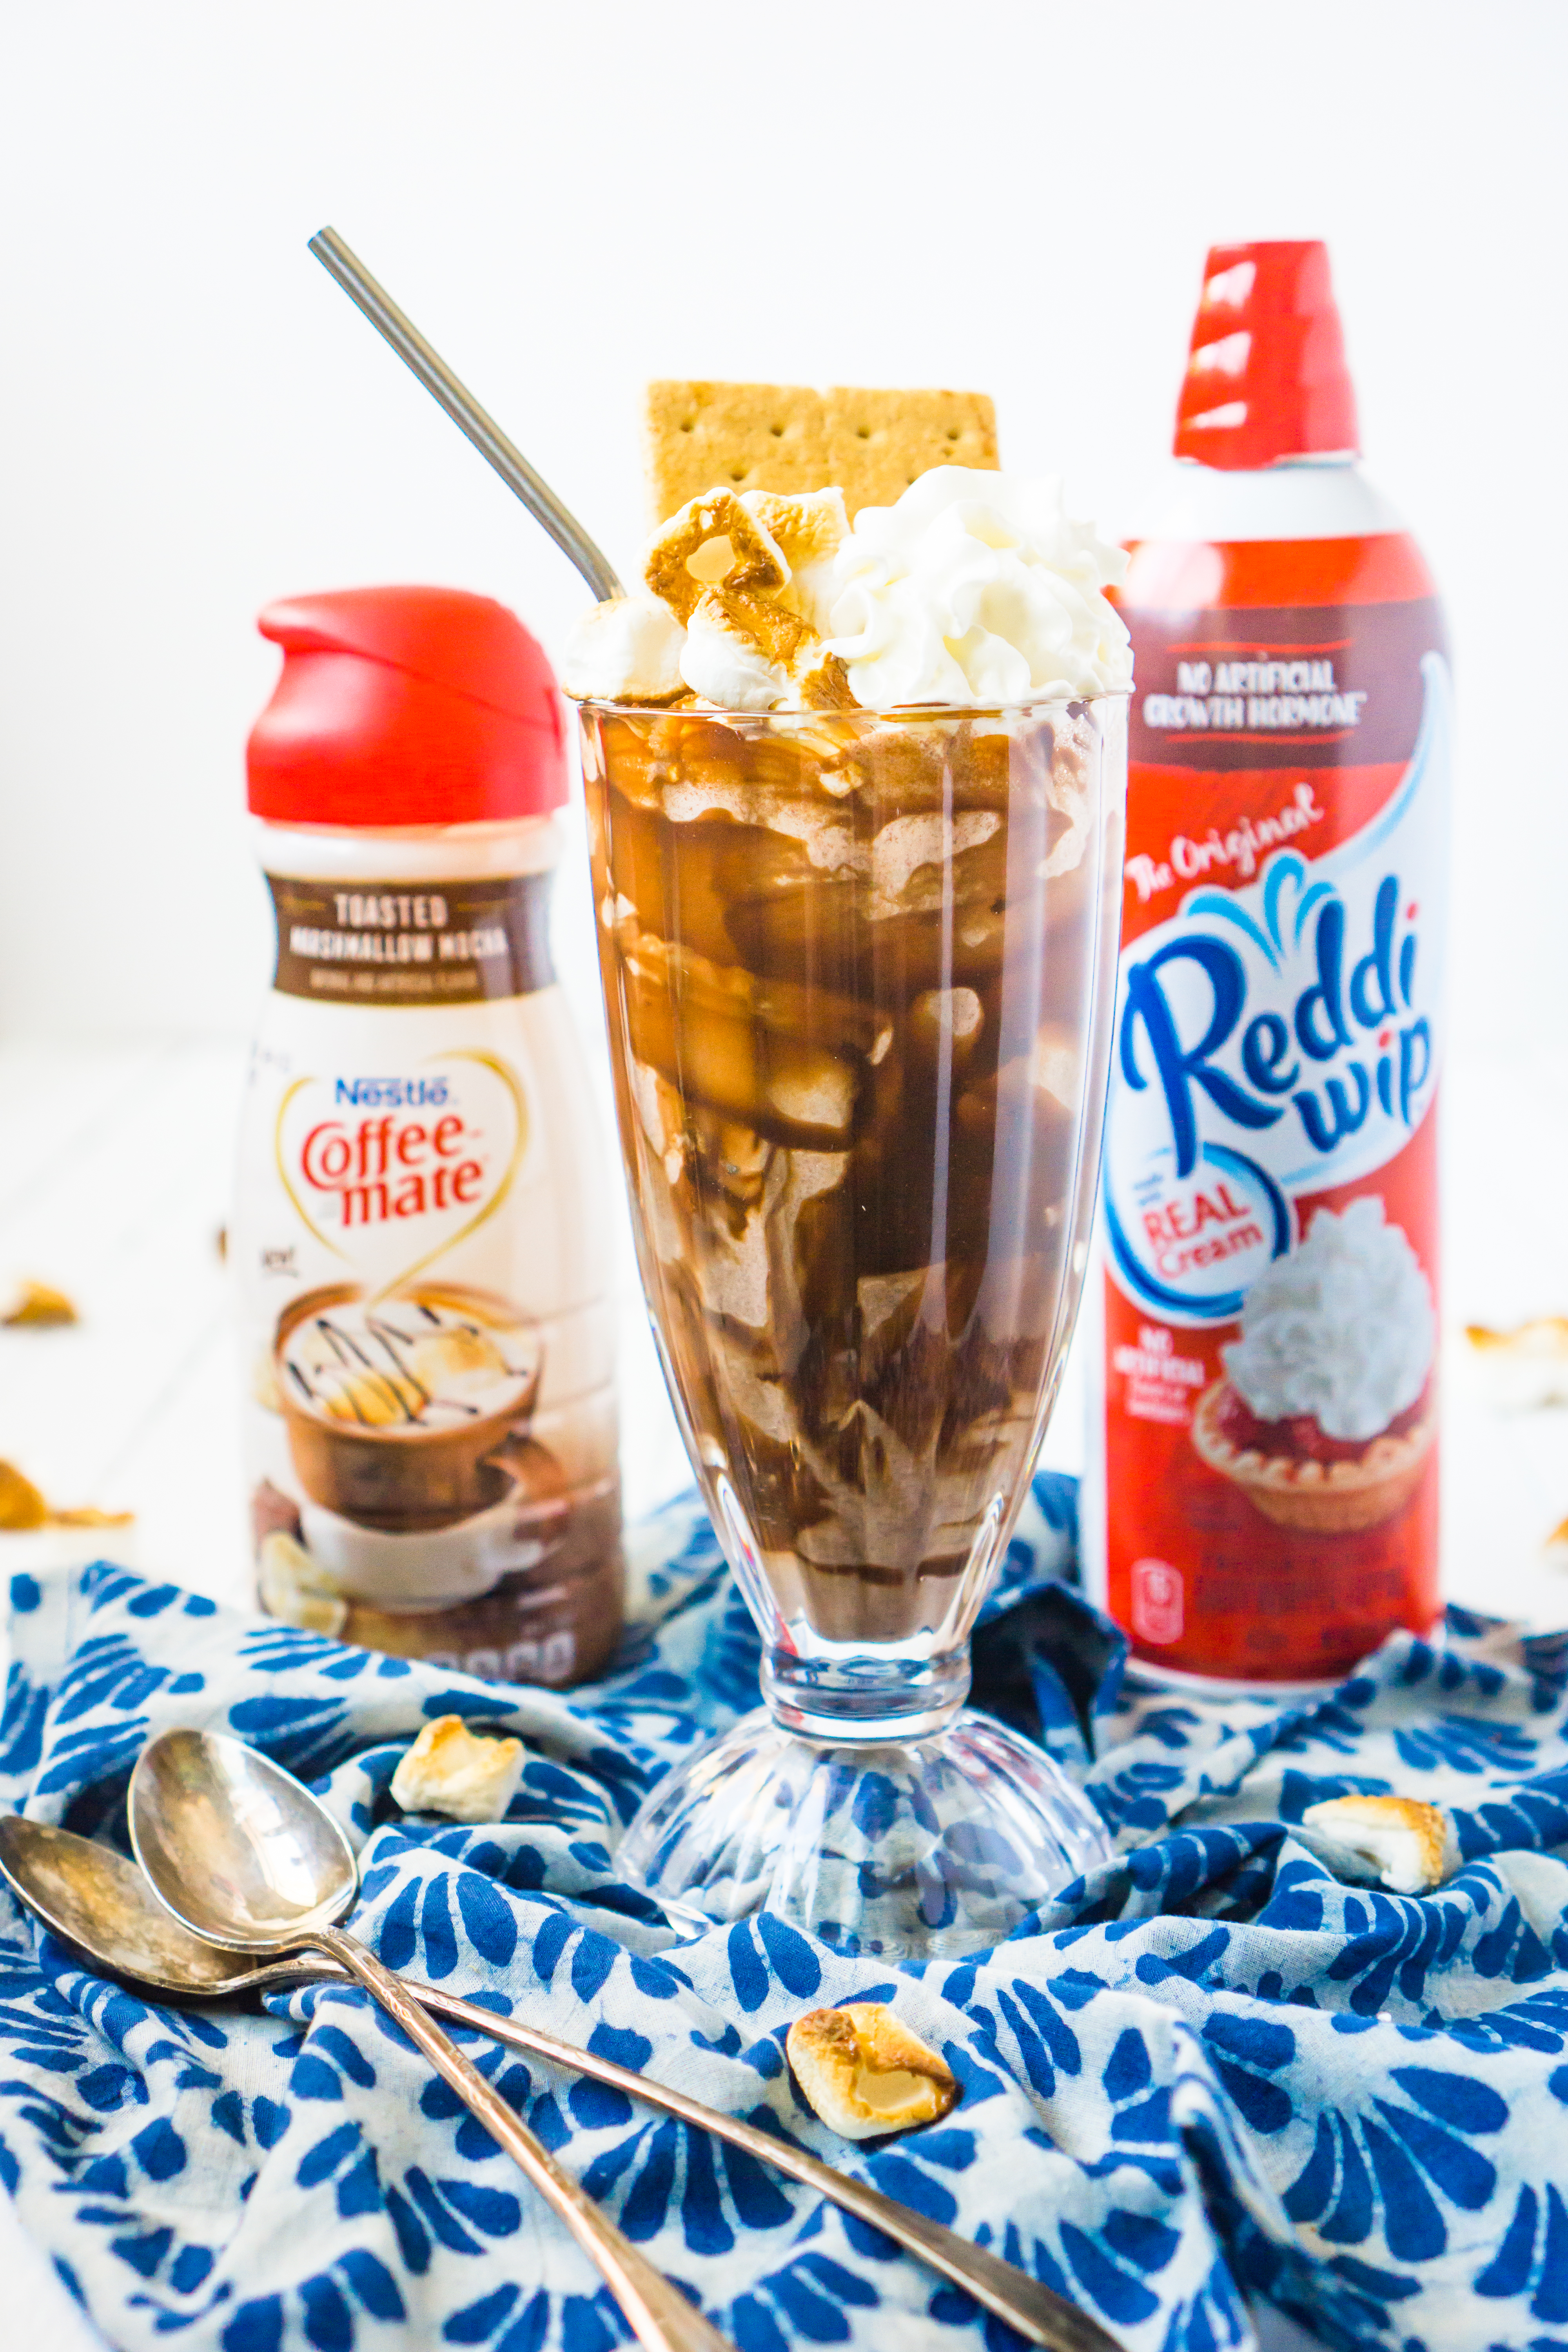 Stay cool this summer by taking the classic summer dessert away from the fire pit and into a tasty and refreshing S'Mores Milkshake! With chocolate ice cream, graham crackers, COFFEE-MATE® Toasted Marshmallow Mocha Liquid Coffee Creamer and a generous dollop of Reddi-wip, you are going to want to share this summer ice cream treat with all your friends and family! 